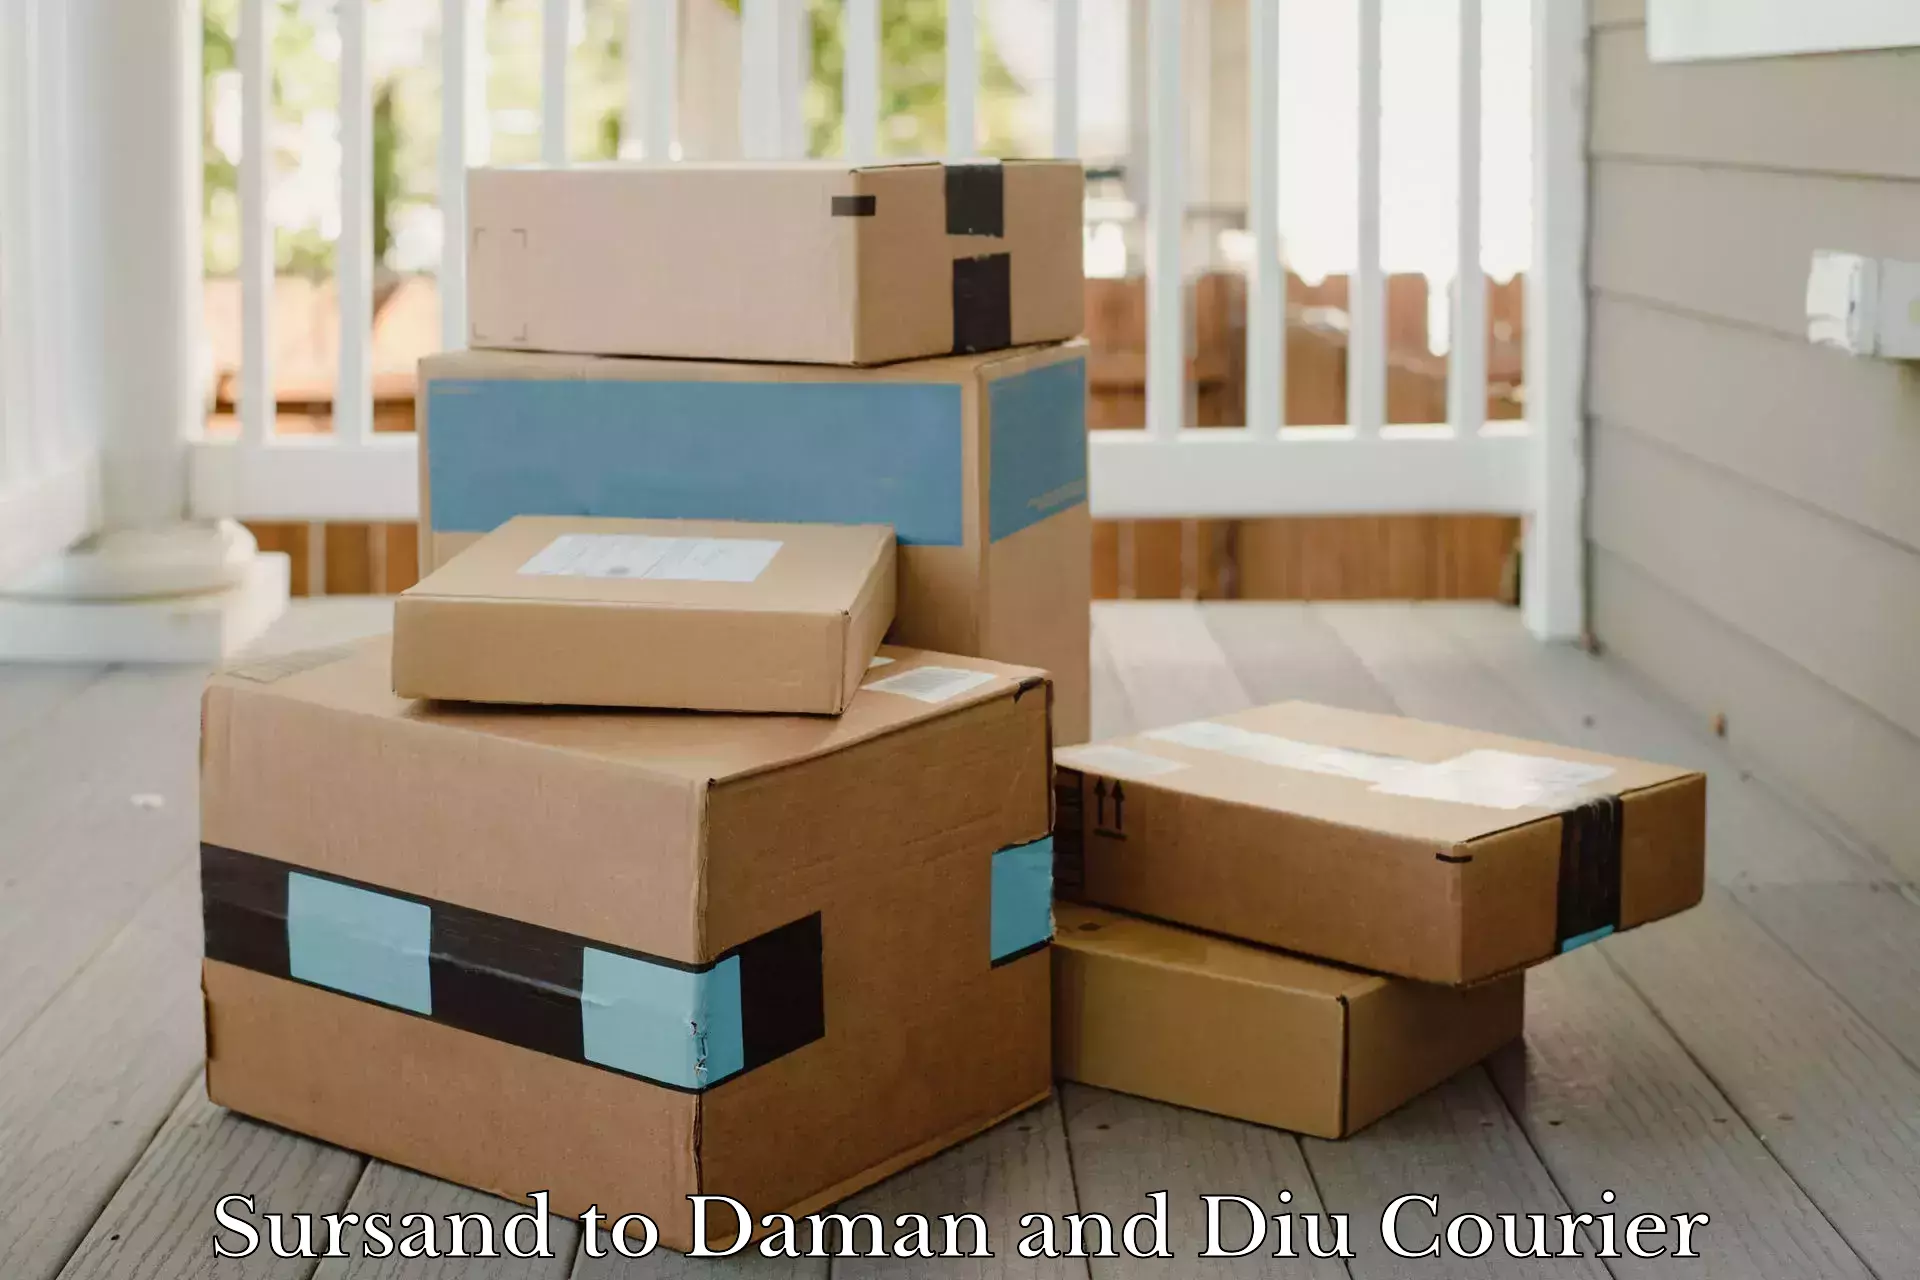 Specialized shipment handling Sursand to Daman and Diu